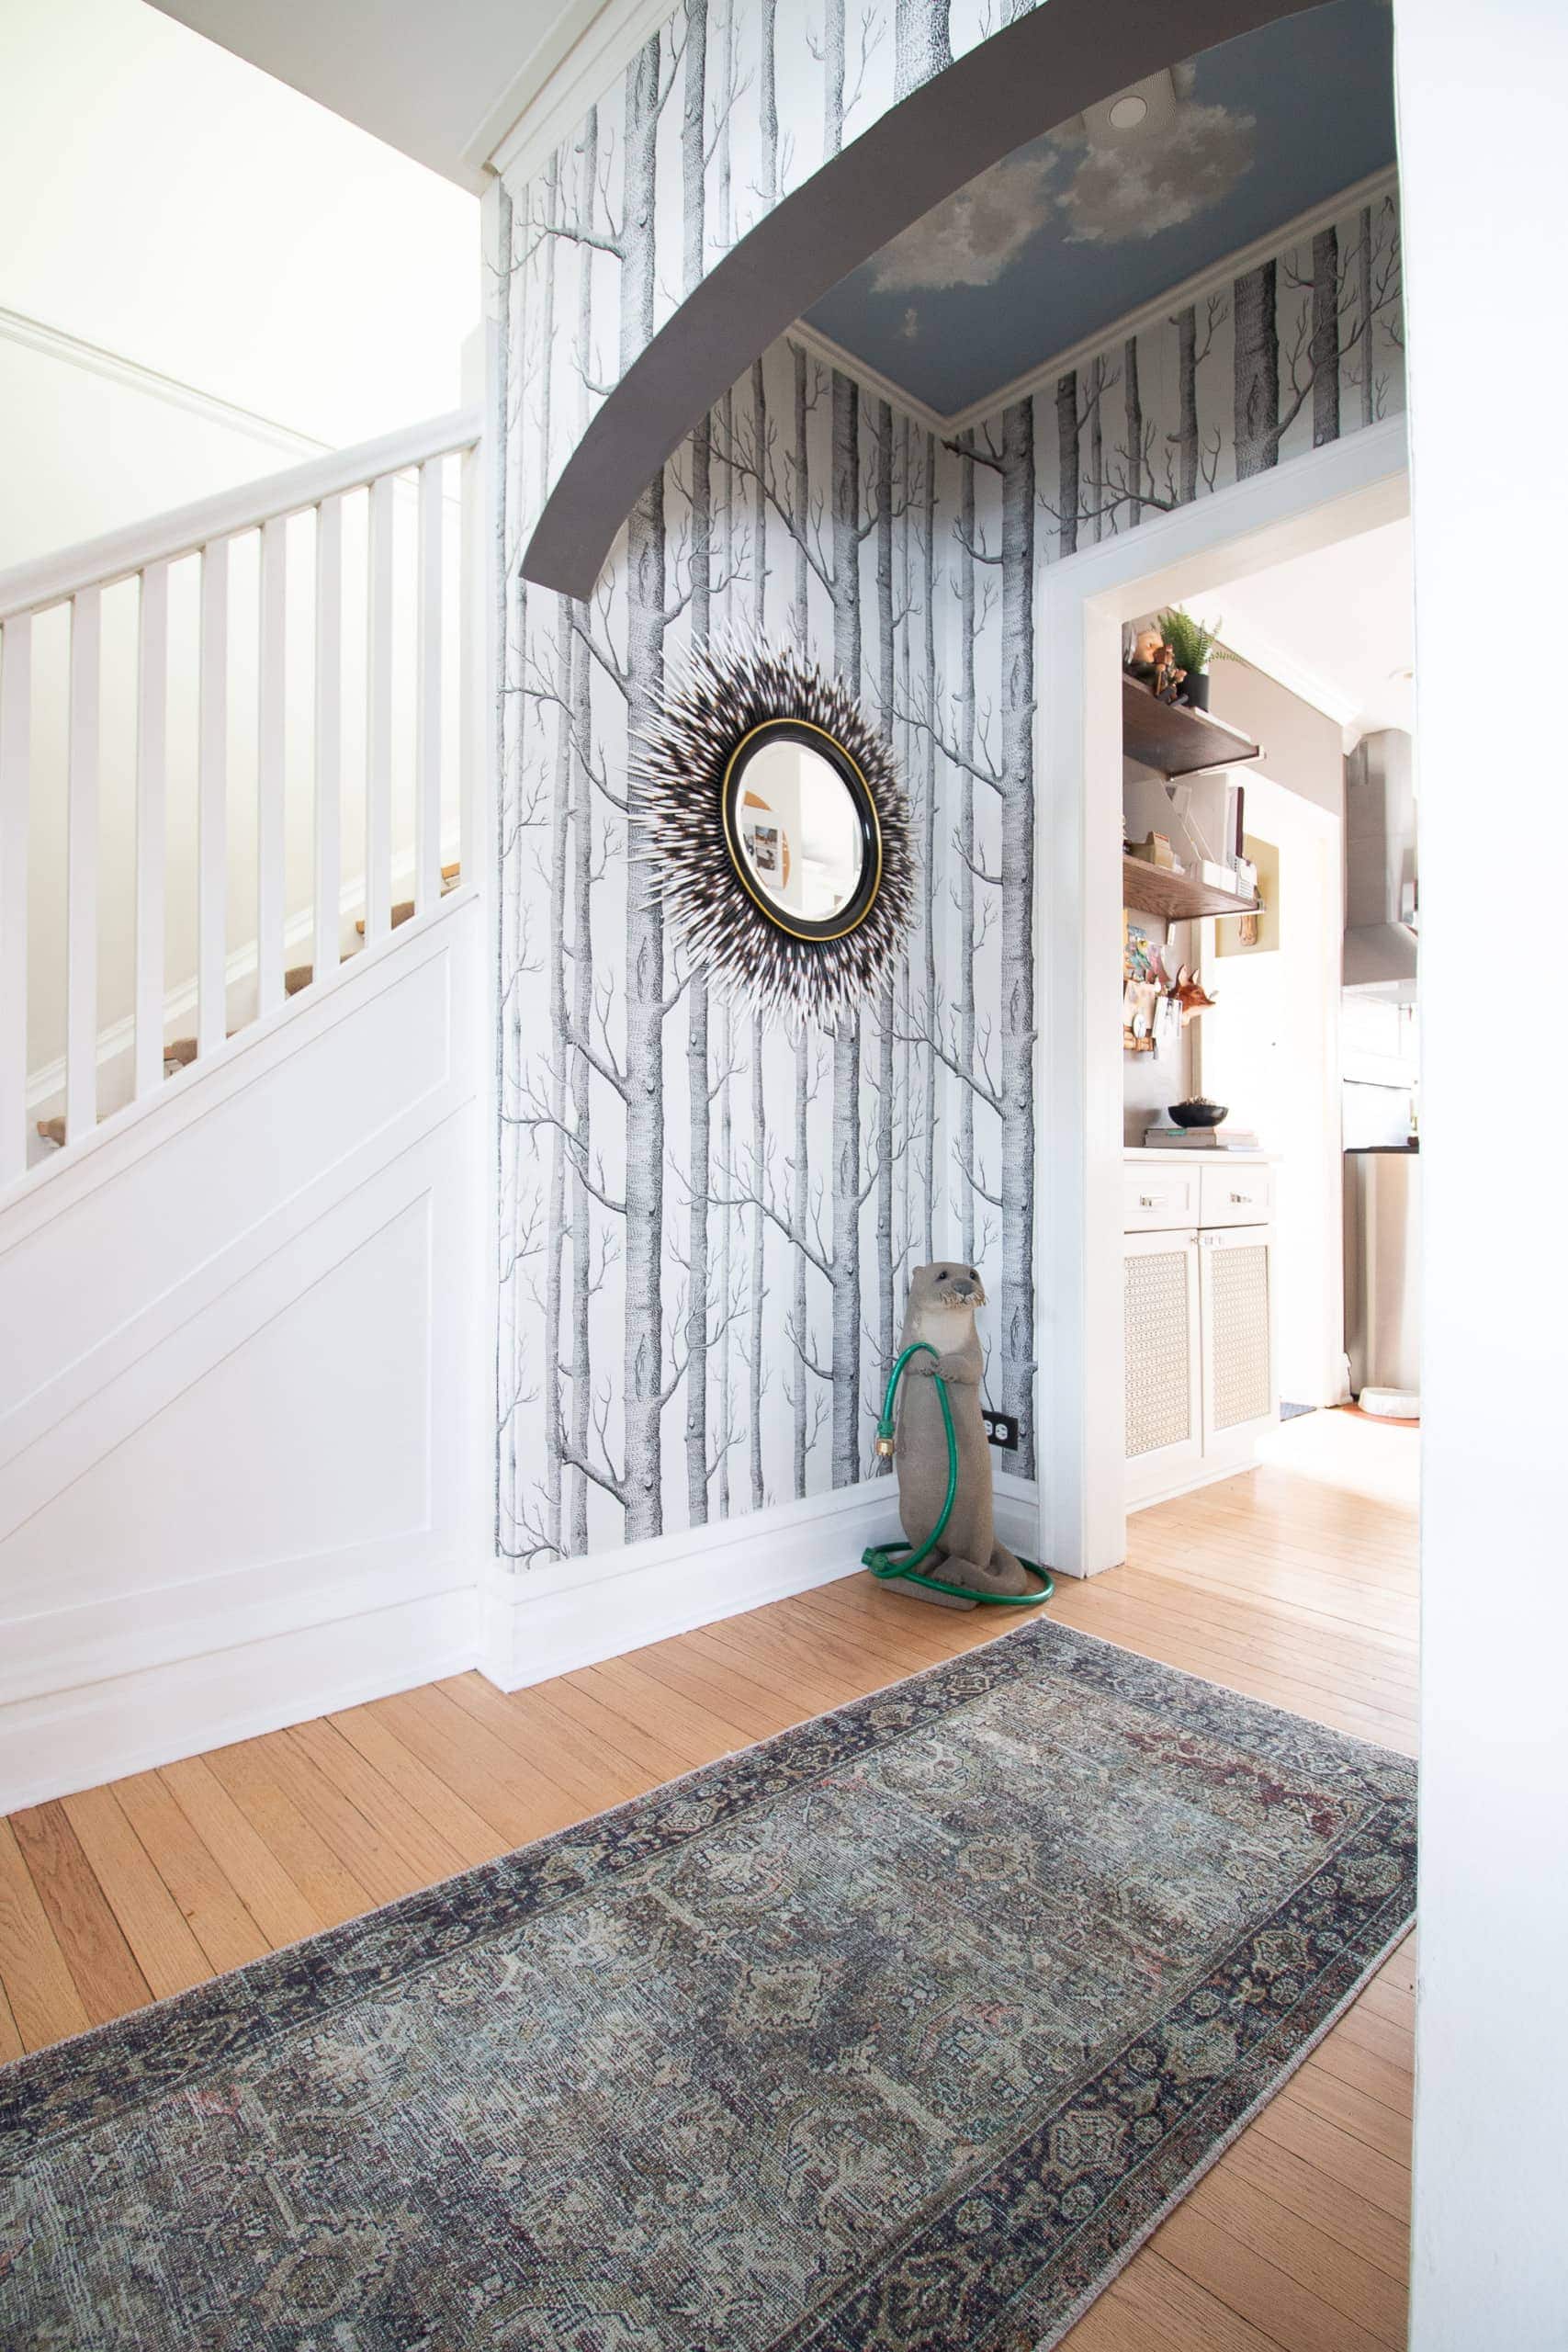 tree wallpaper in this whimsical home with unique accents